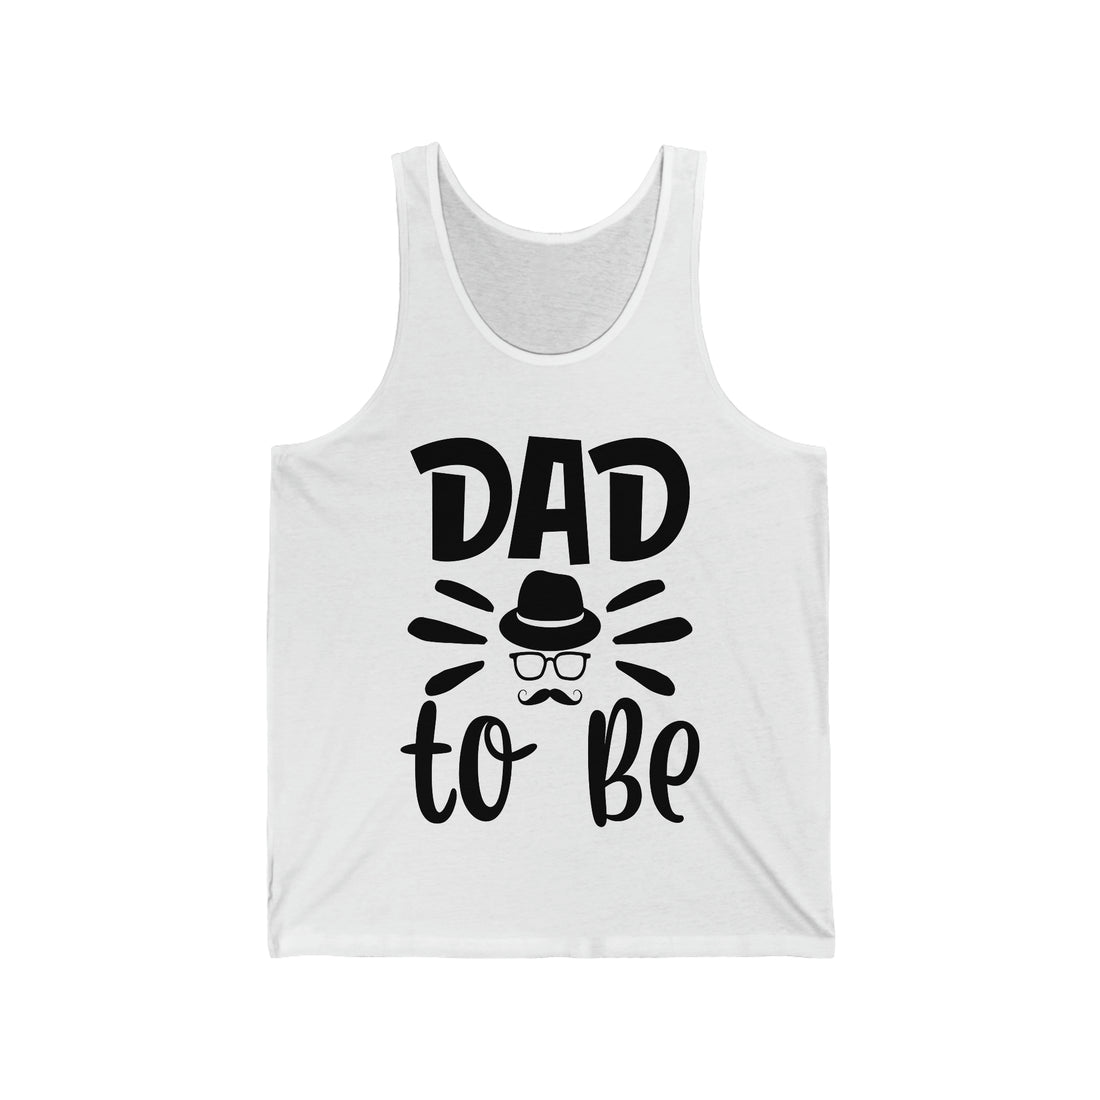 Dad To Be - Unisex Jersey Tank Top